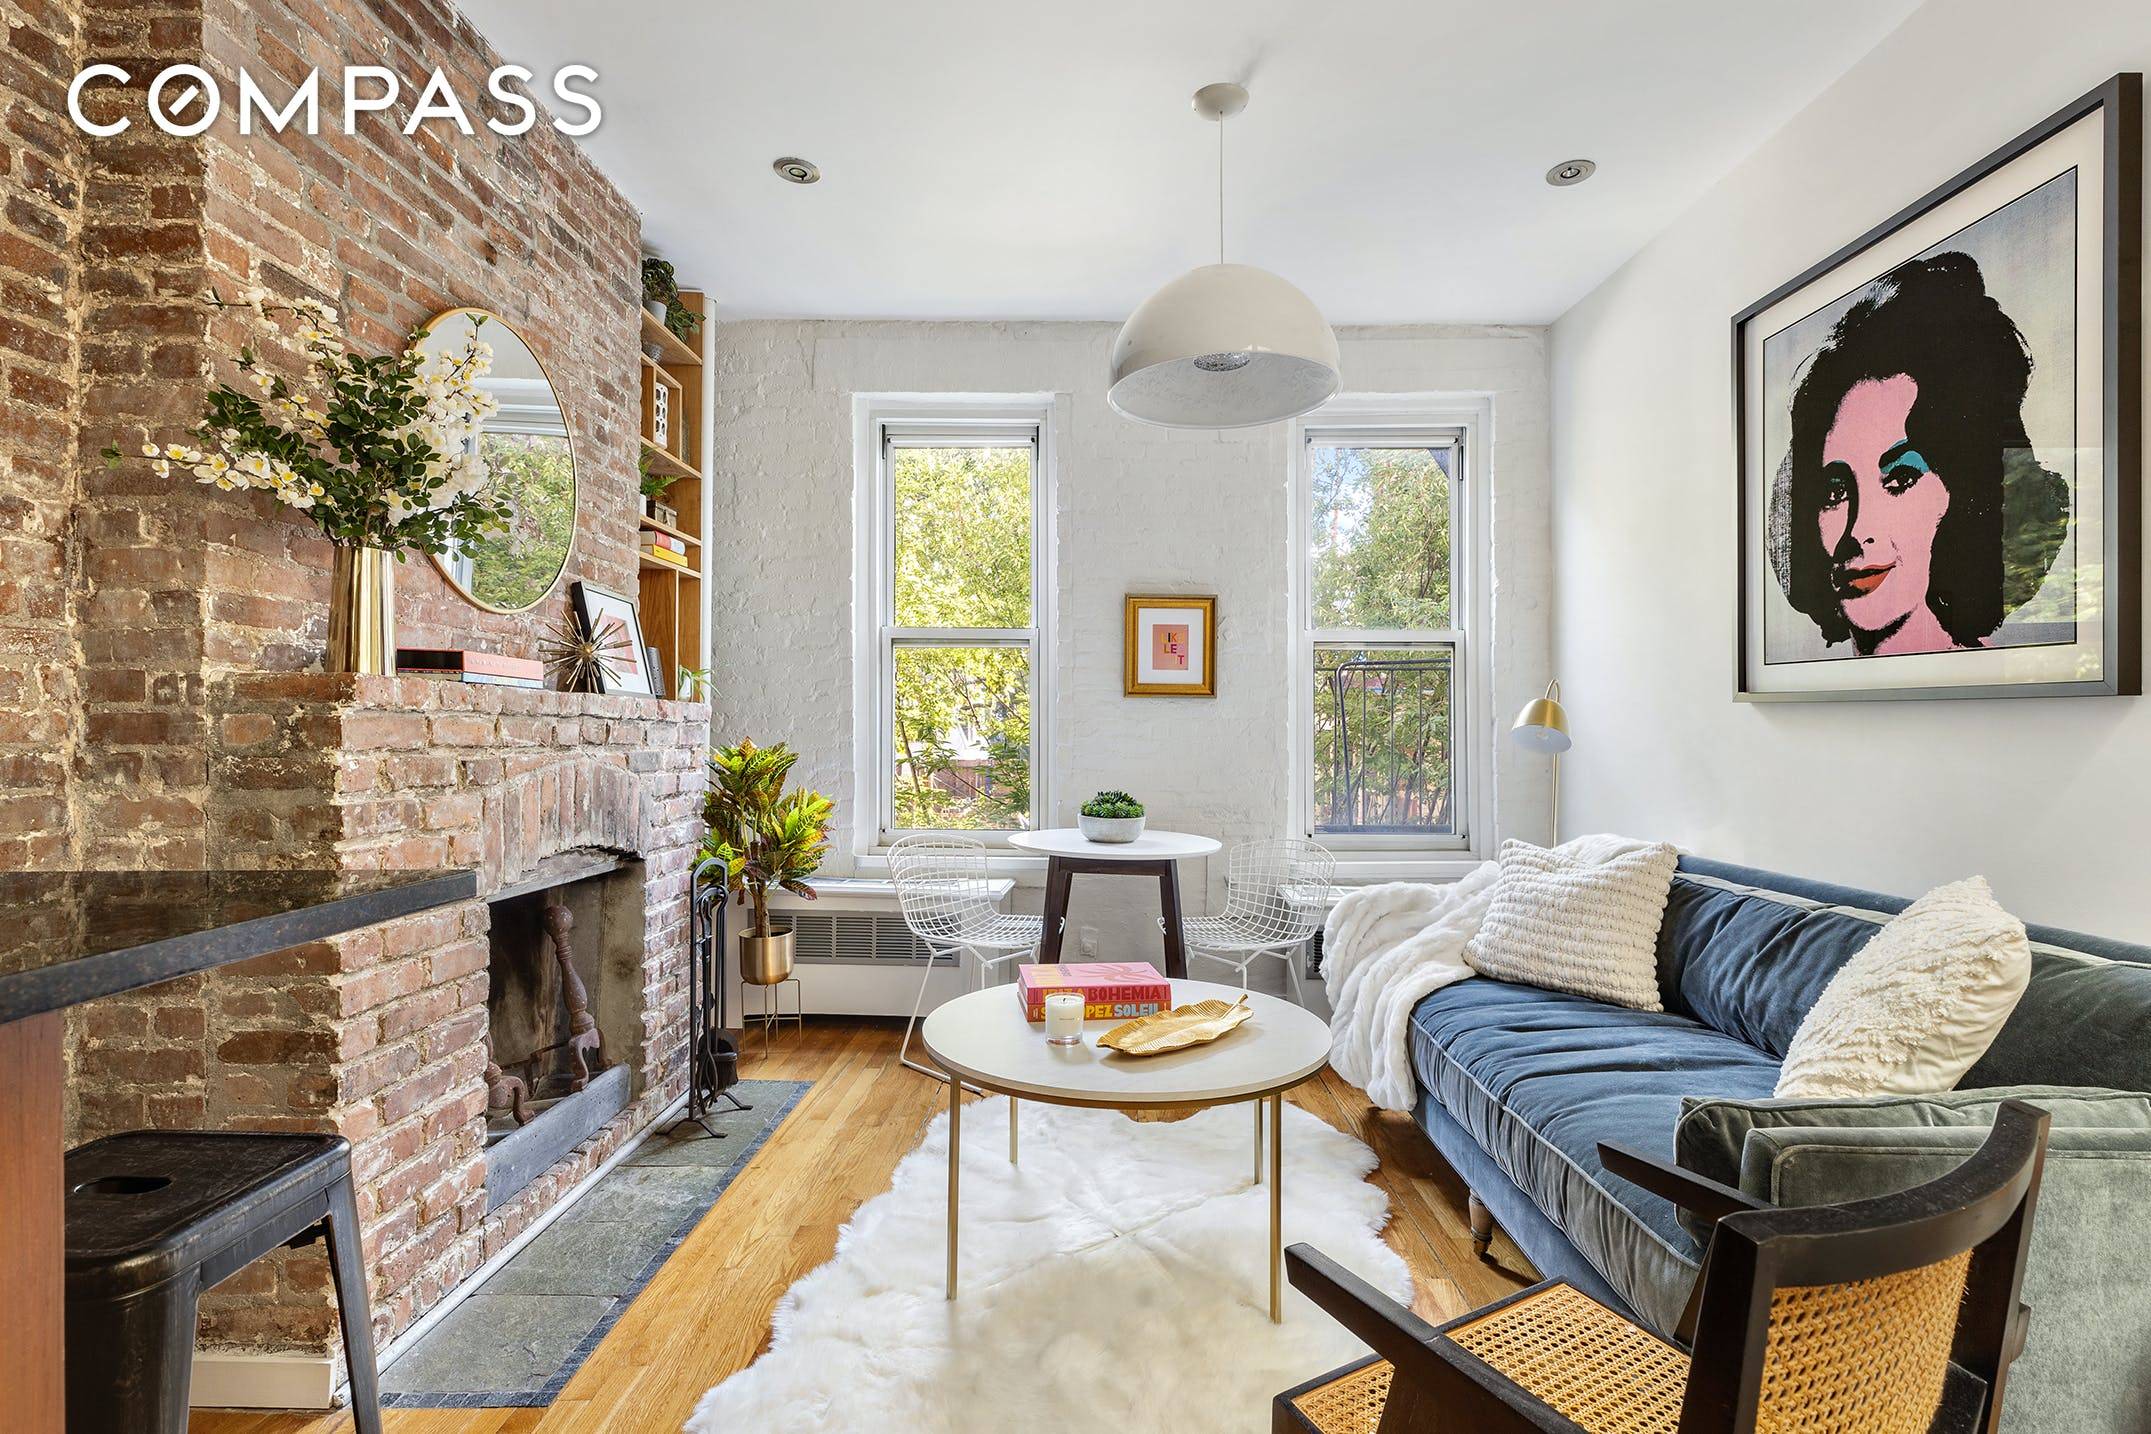 DREAM DUPLEX. A unique two bedroom home with a wood burning fireplace and a private roof deck is the essence of the West Village.